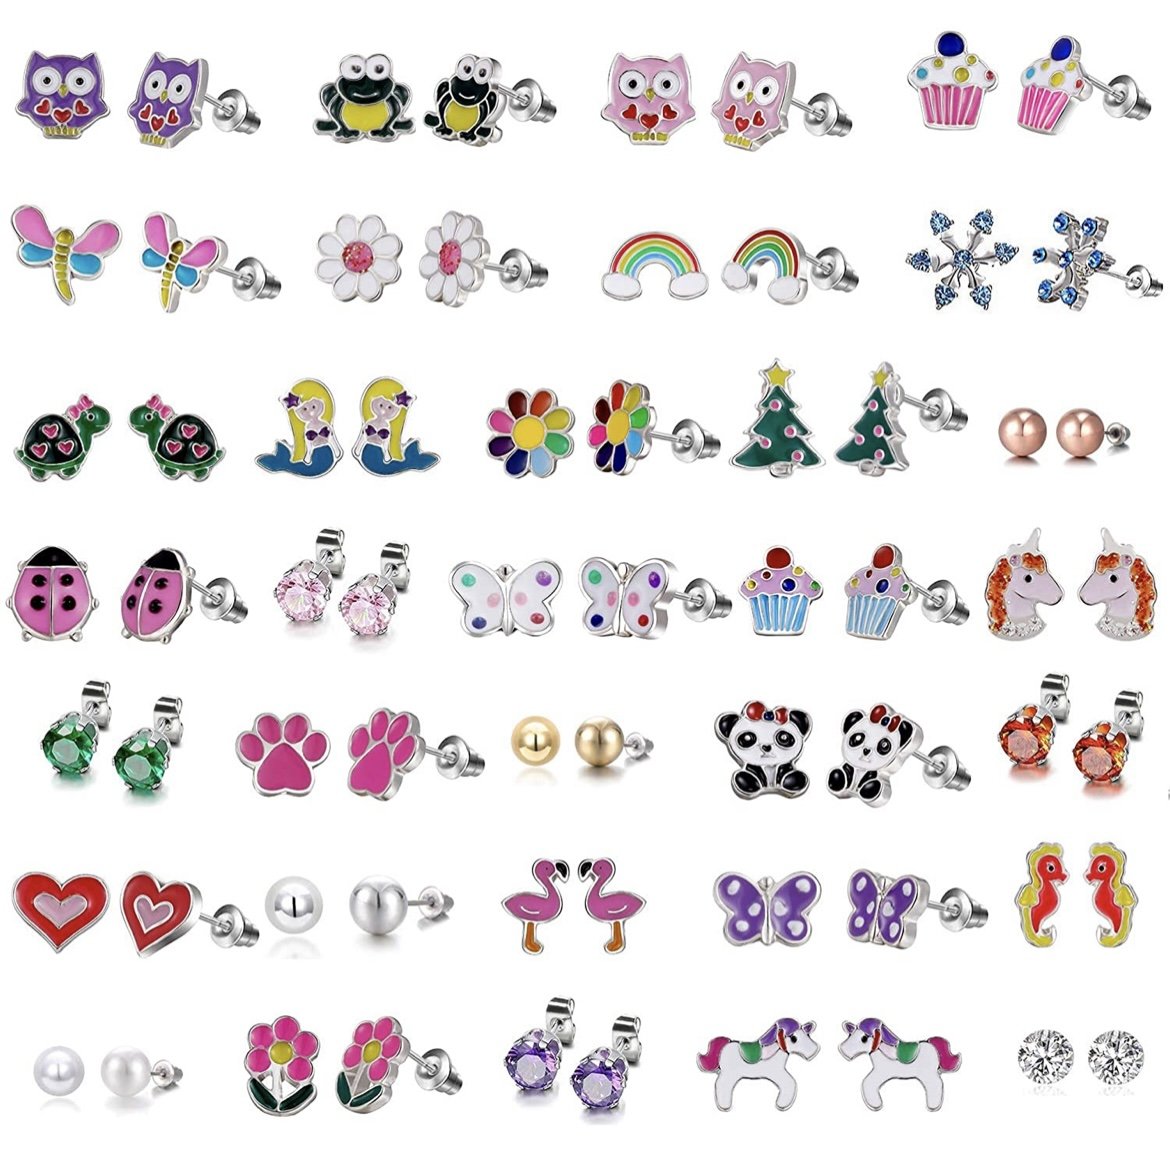 Children’s Ear Piercings, What’s the Best Option? — Value Minded Mama